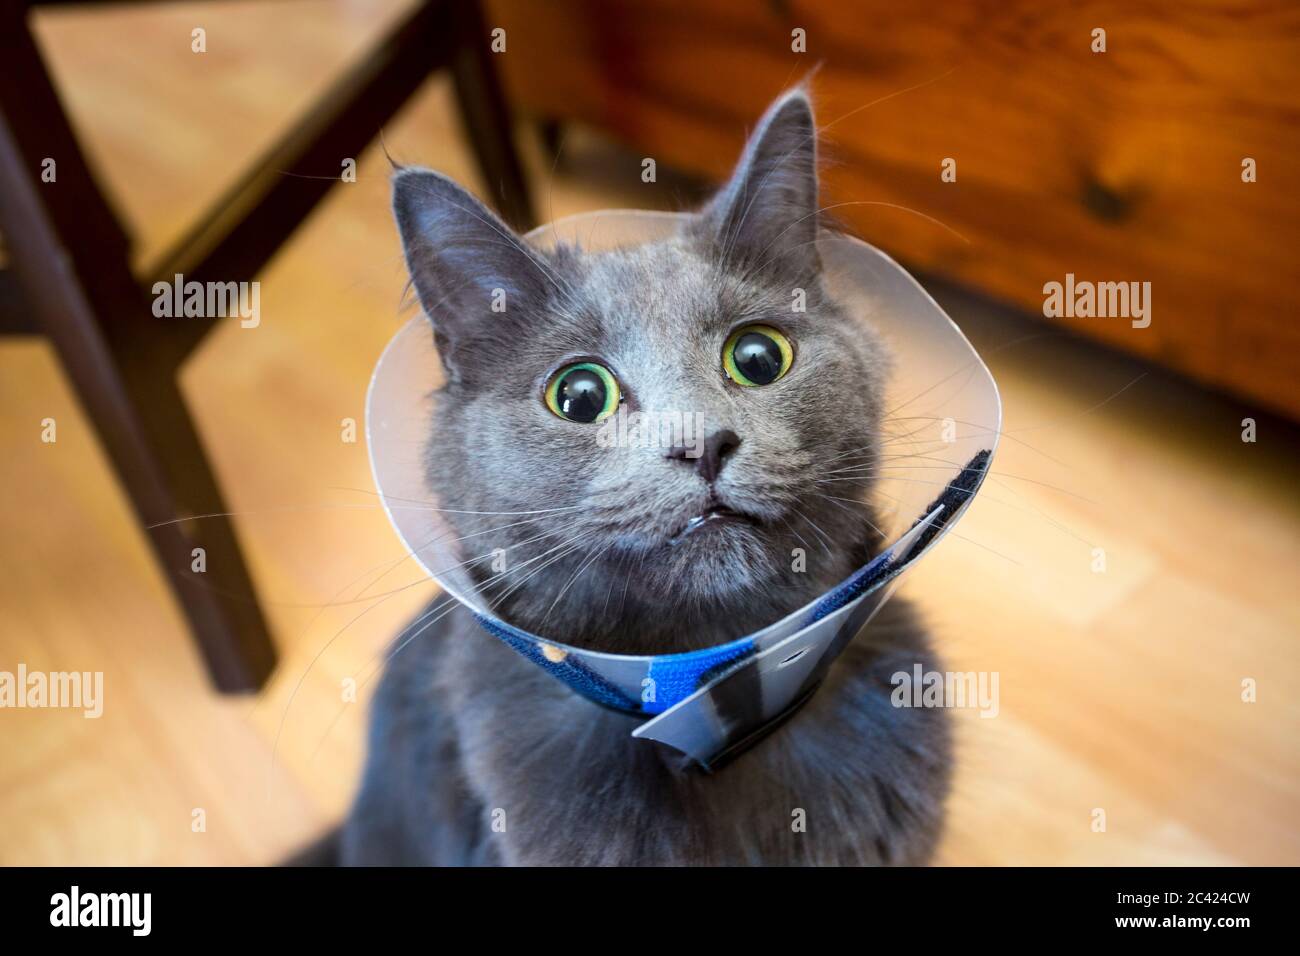 cat with protective plastic vetinary neck cone Stock Photo